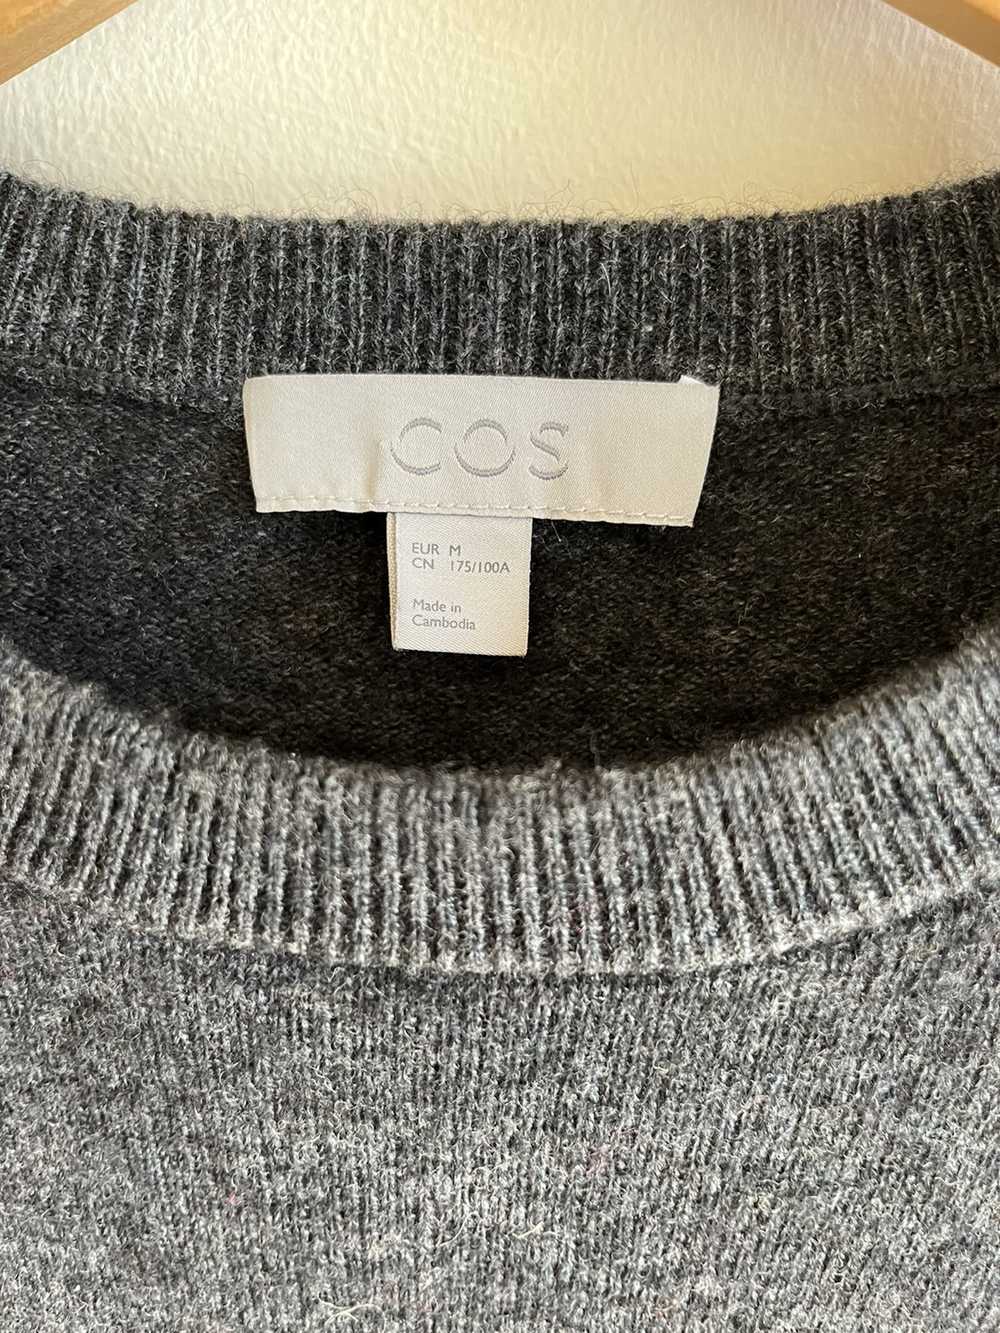 Cos Wool Sweater from COS Black Gray Minimal Our … - image 3